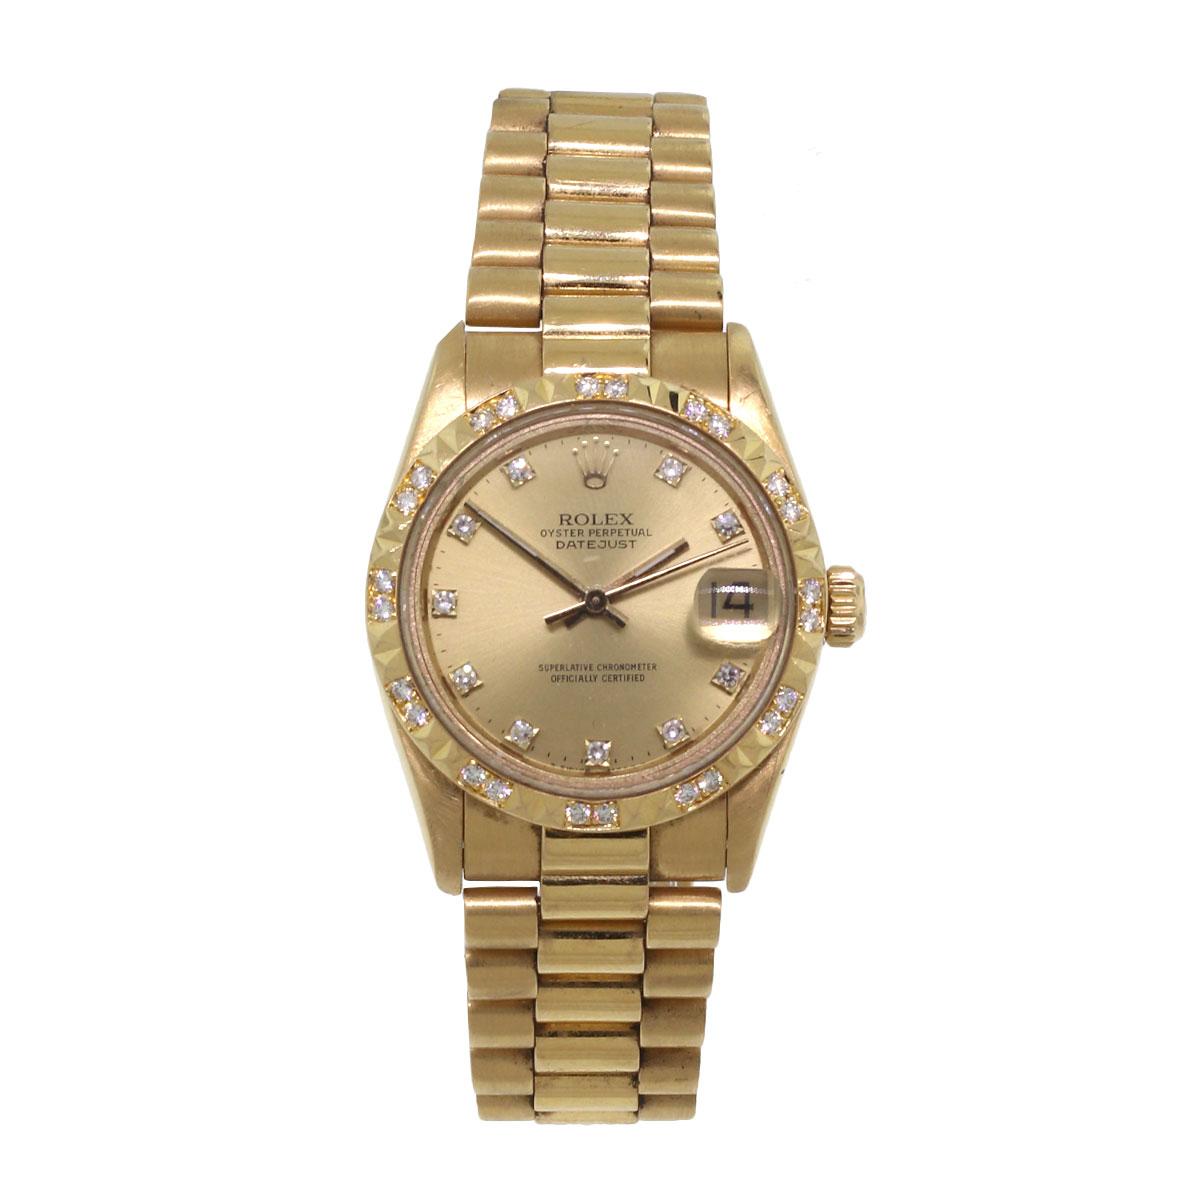 Brand: Rolex
MPN: 68258
Model: Datejust
Case Material: 18k Yellow Gold
Case Diameter: 31mm
Bezel: 18k Yellow Gold Diamond Bezel
Dial: Champagne dial with diamond hour markers. Date can be found at 3 0'clock
Bracelet: 18k Yellow Gold presidential